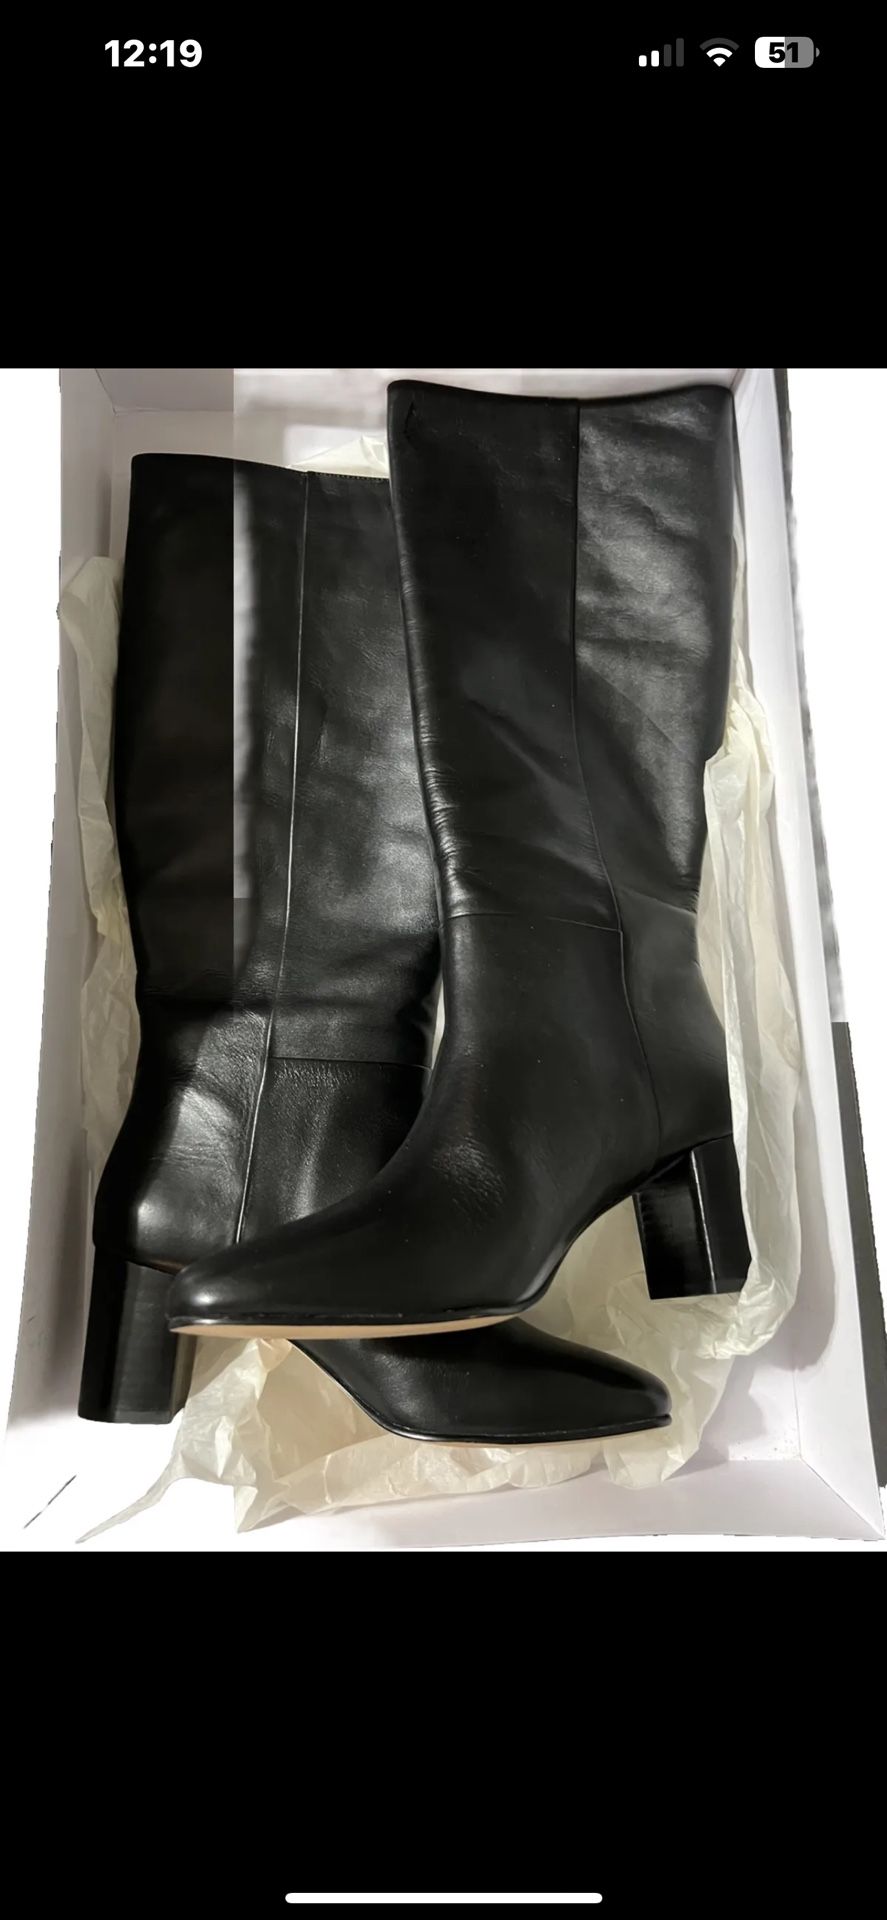 Jcrew Women’s Knee High Leather Boots Size 8